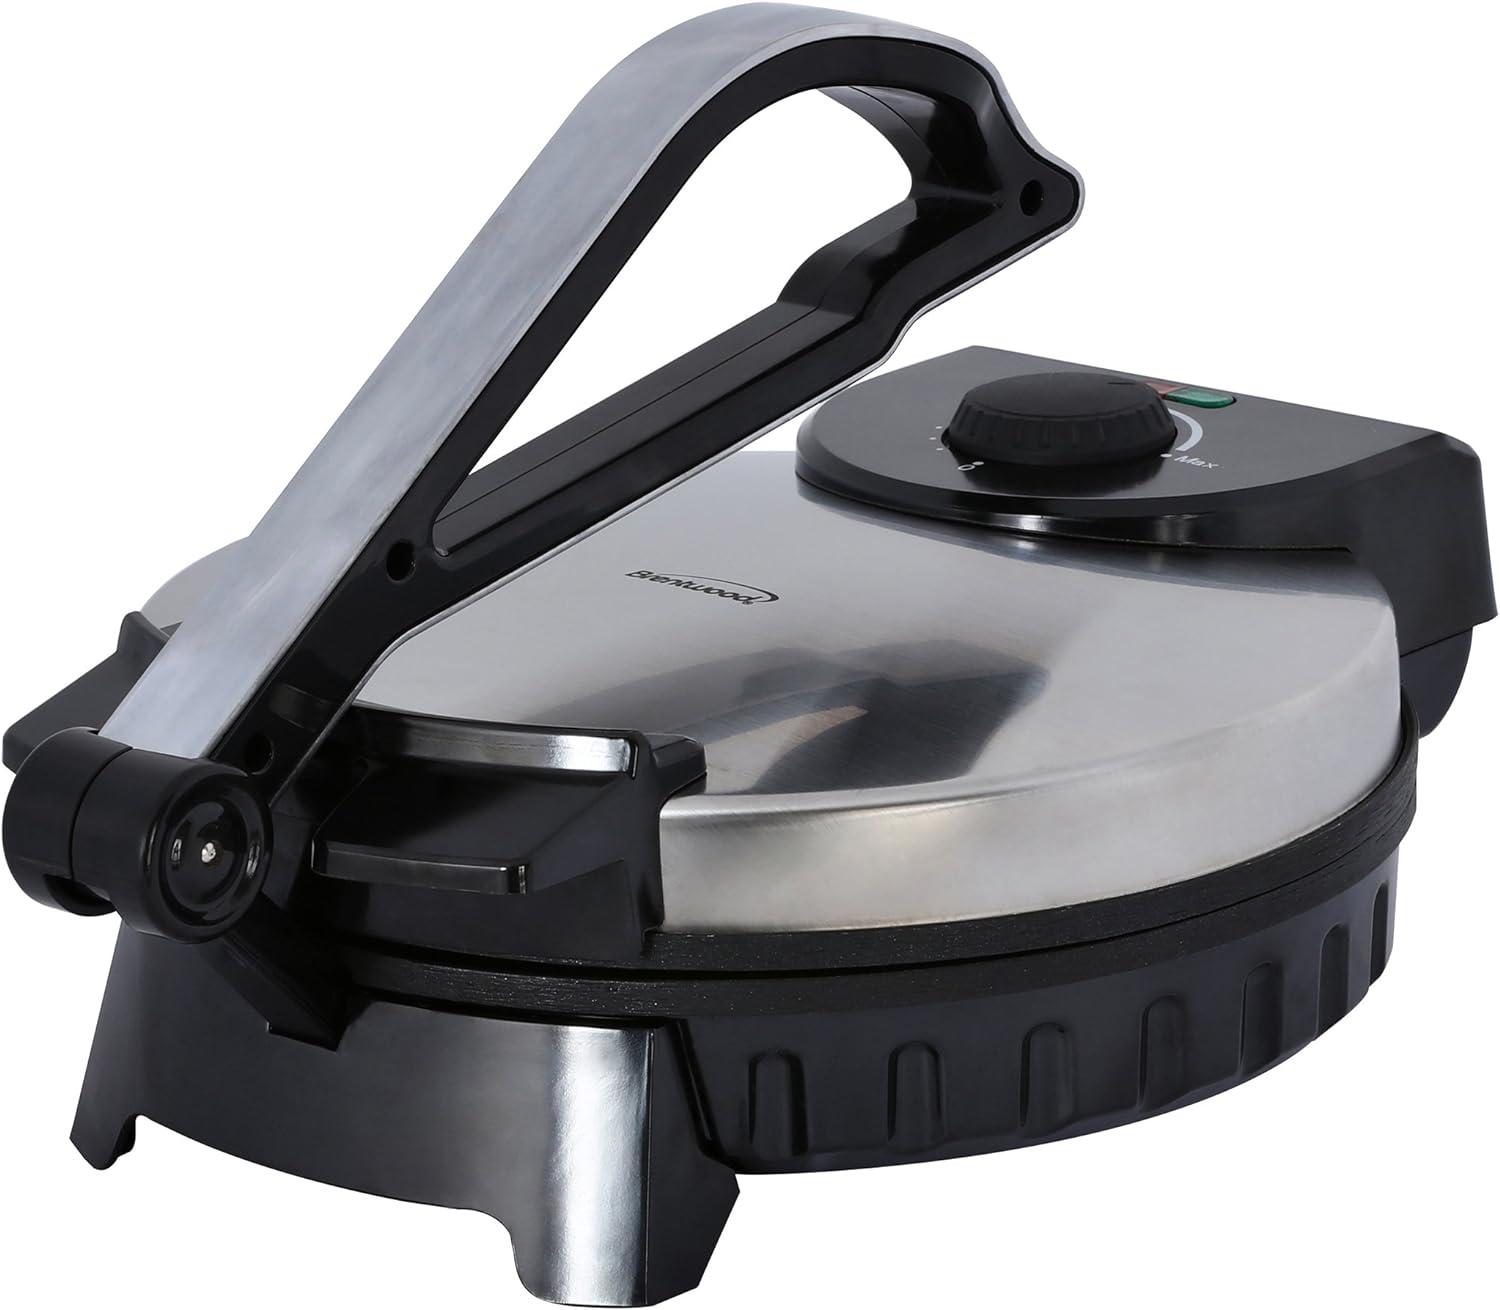 Brentwood Electric Tortilla Maker, Non-Stick, 10", Brushed Stainless Steel/Black, Retail $50.00